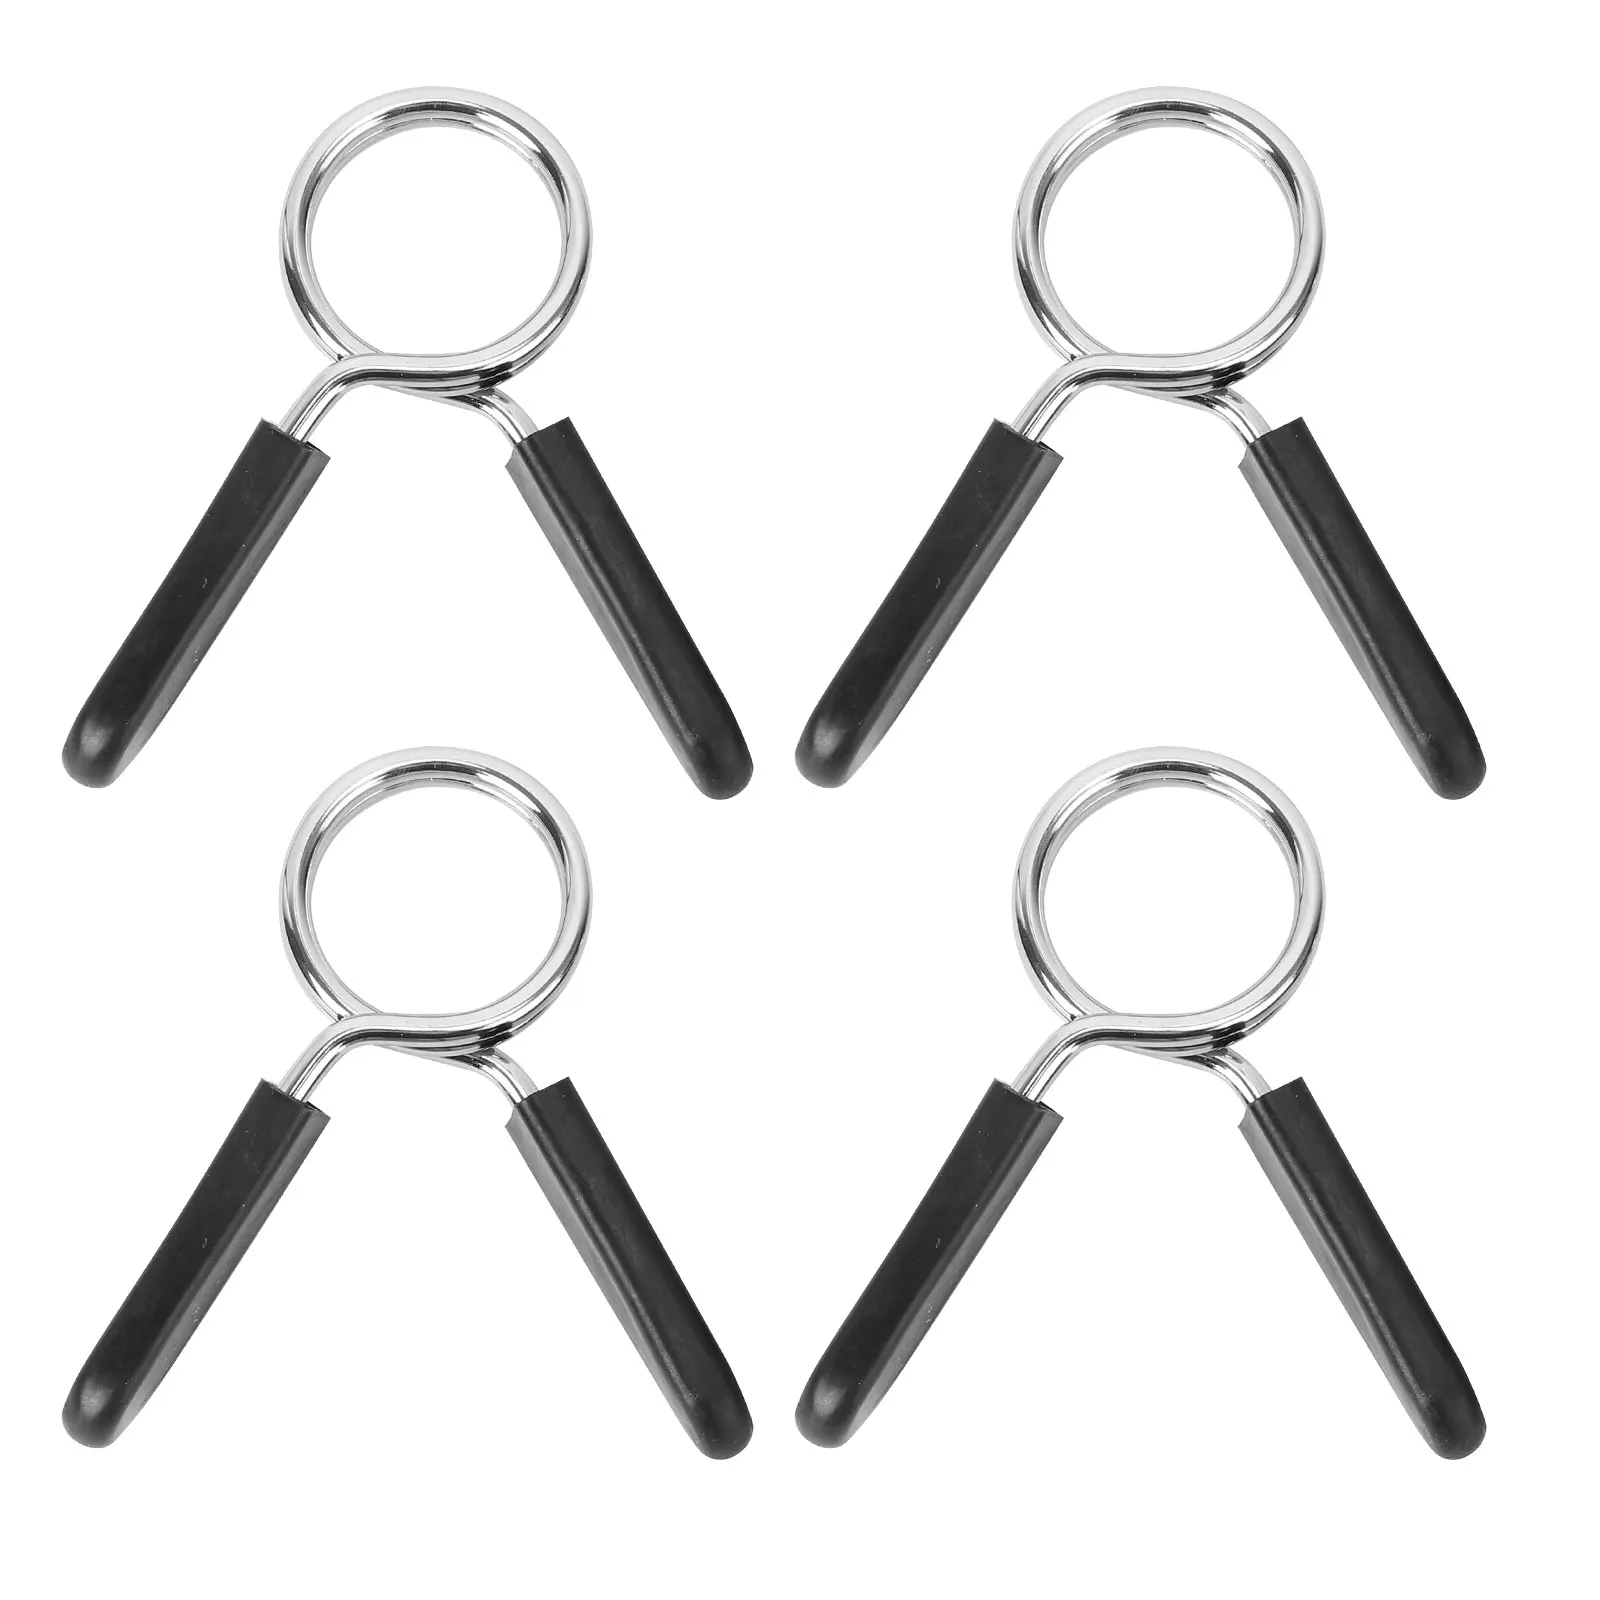 

4pcs 28/30mm Dumbbell Barbell Clamps Spring Collar Clips Collars Gym Weight Dumbbell Lock Standard Lifting Kit Barbell Lock Hot